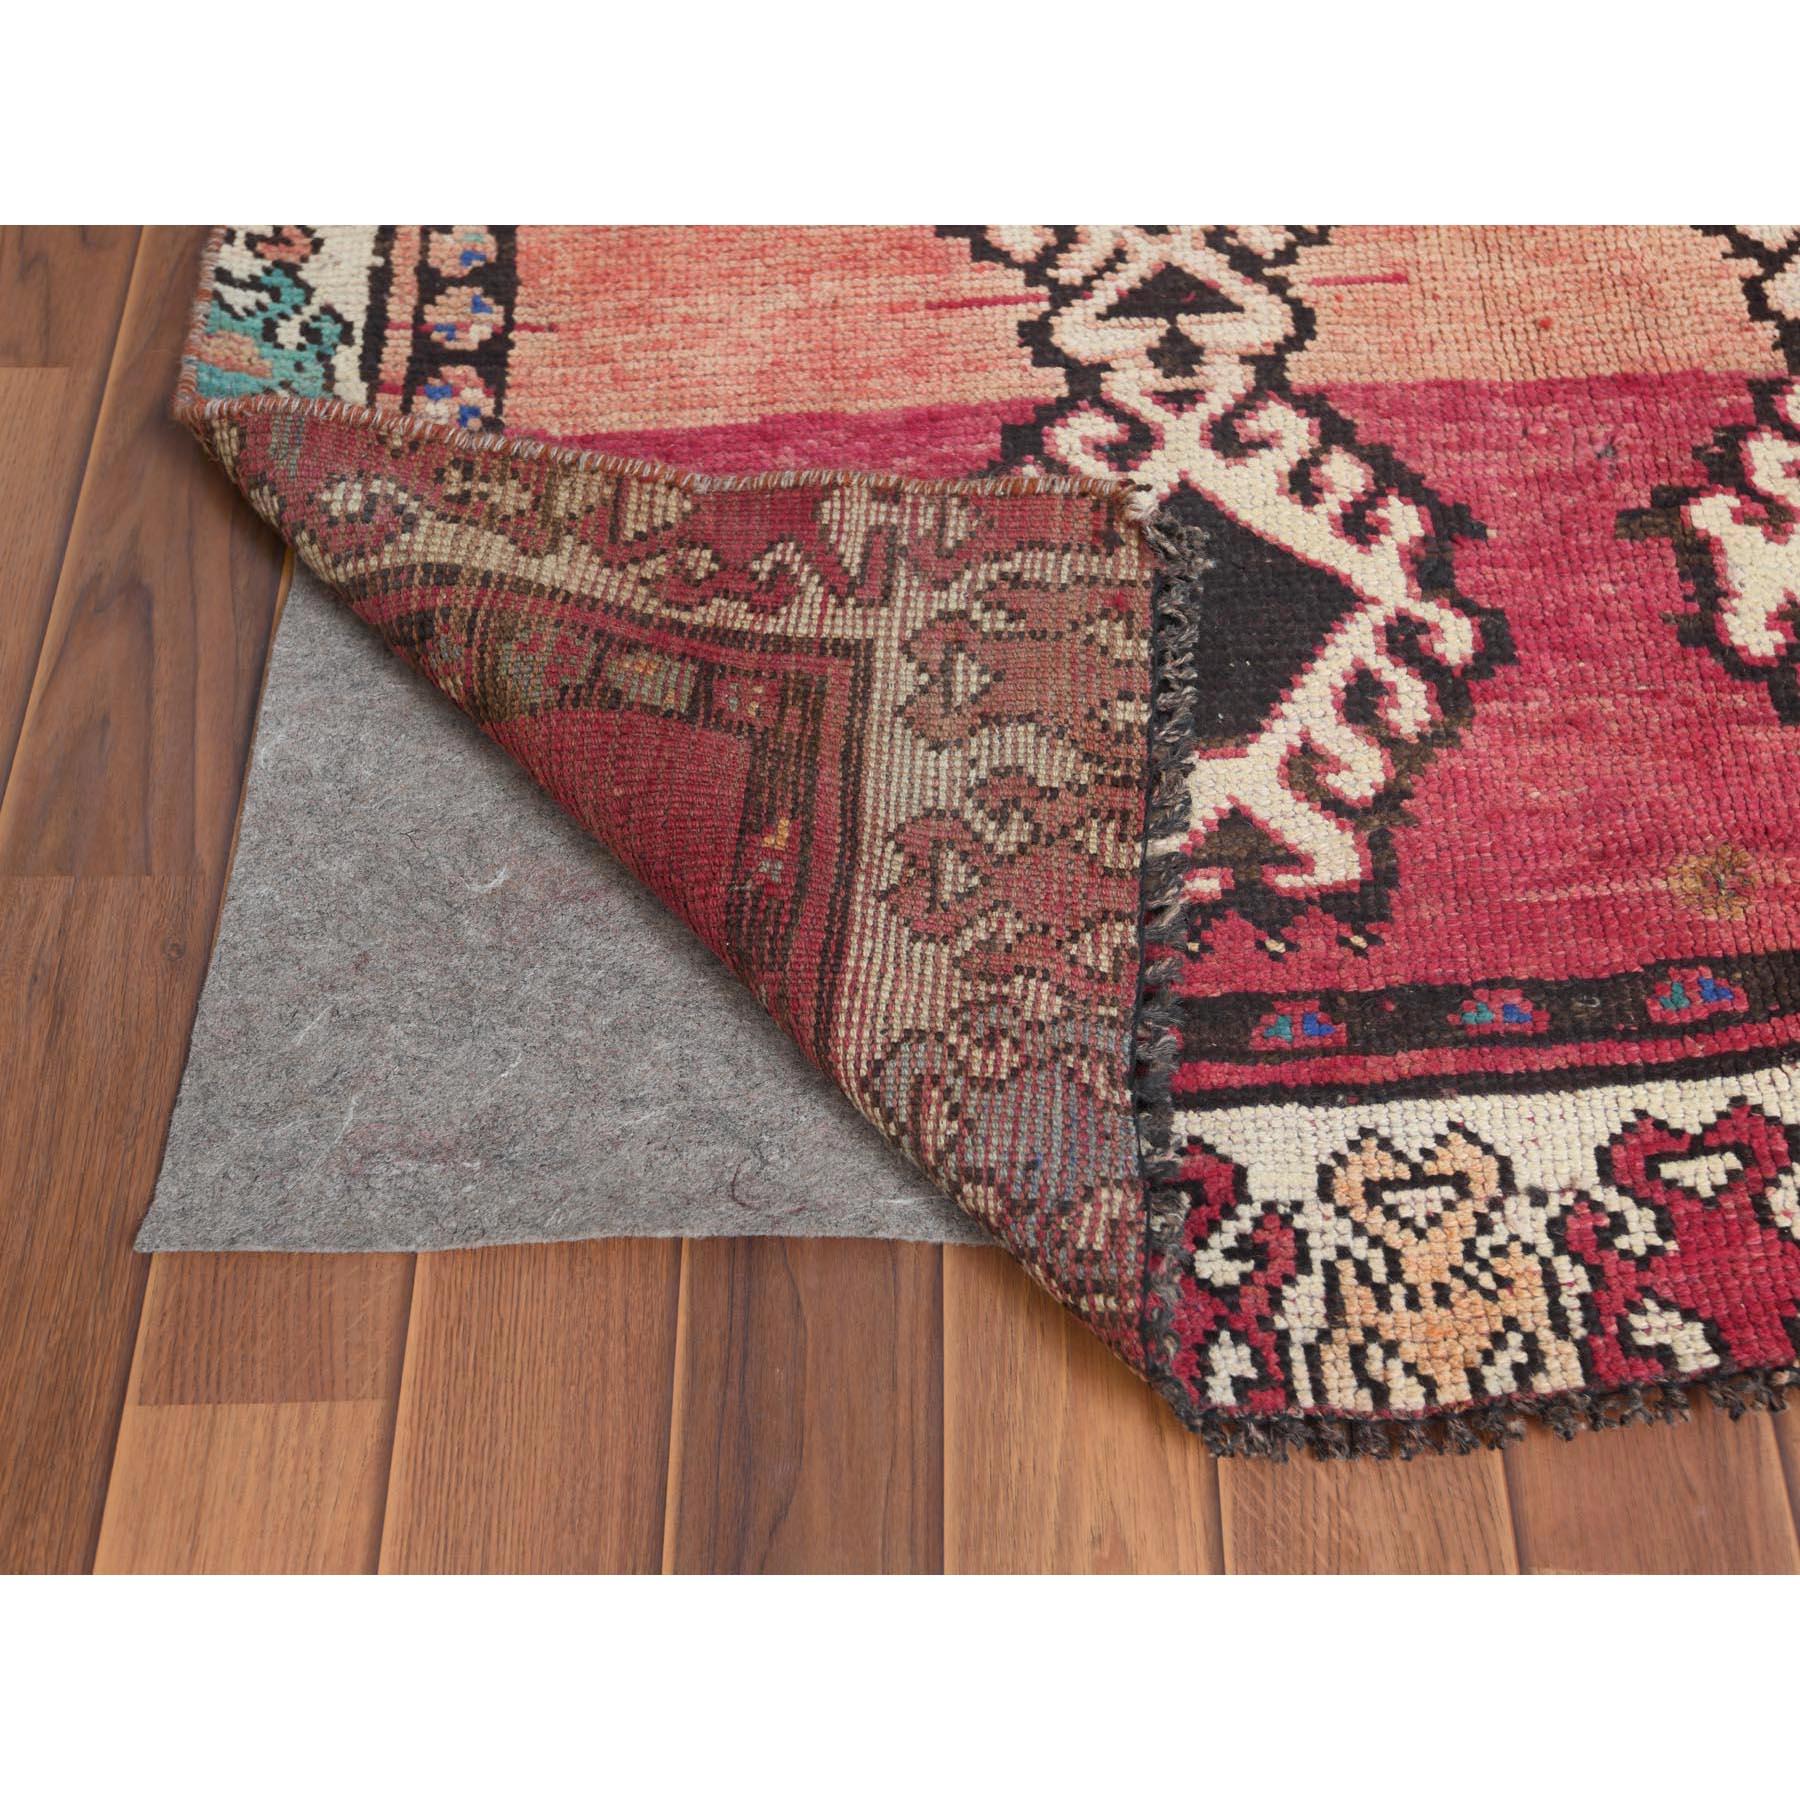 Medieval Bohemian Red Persian Shiraz Handmade Wool Old Distressed Gallery Size Runner Rug For Sale